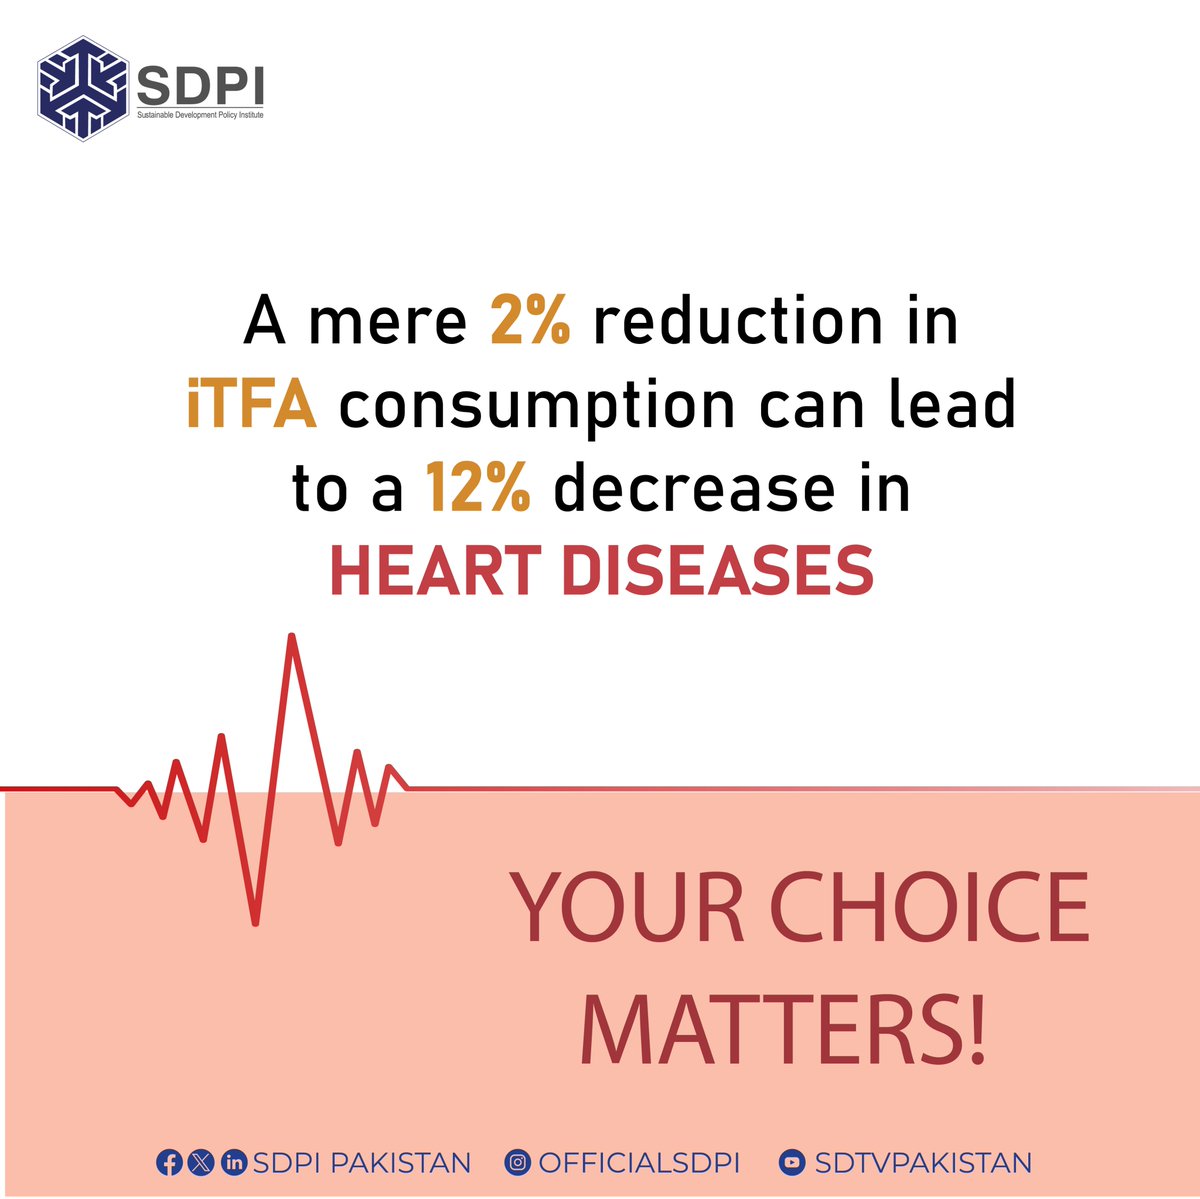 Empower yourself with knowledge about Industrial Trans Fatty Acids (iTFA). Small changes in our diet can lead to significant health benefits and savings in healthcare costs. Let's make informed choices for a healthier tomorrow. 💪📚 #HealthyLiving #PreventiveHealth